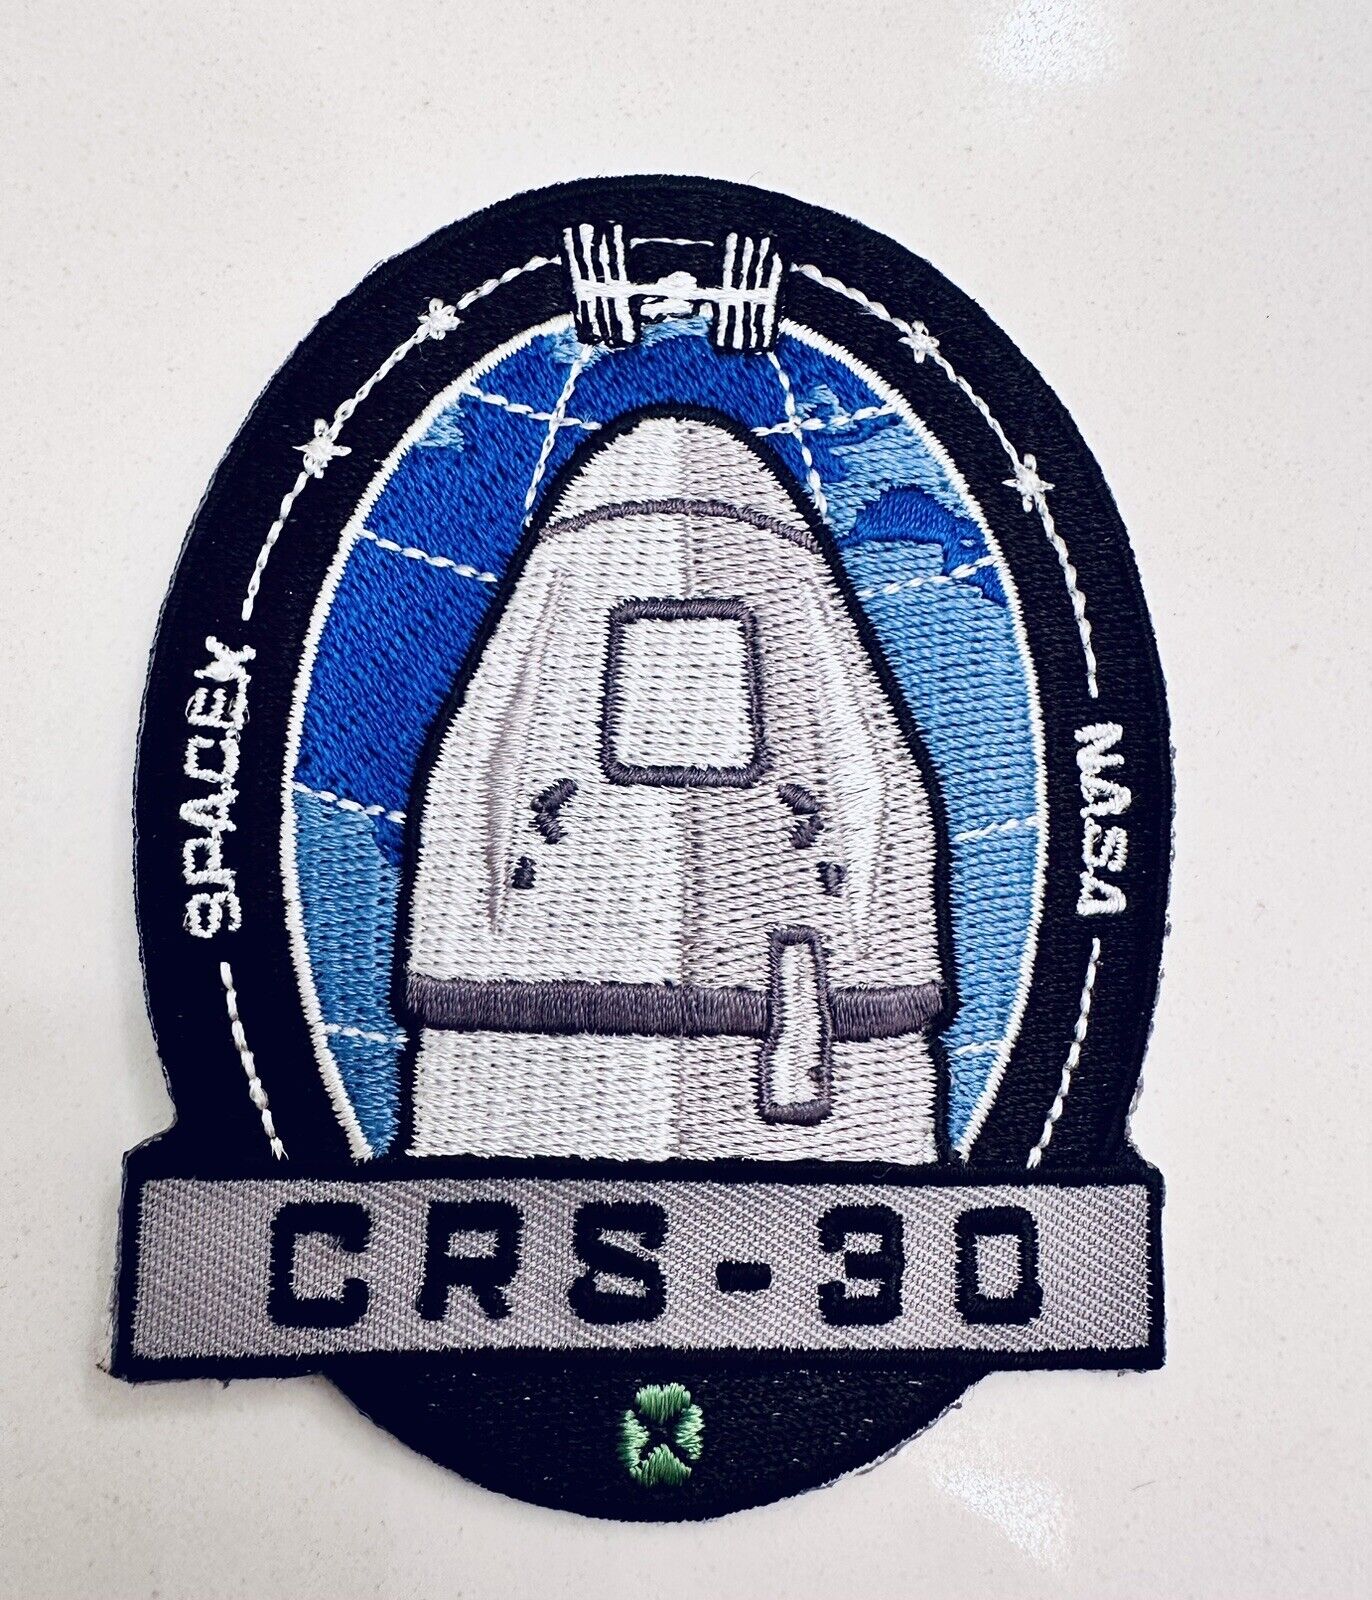 Original SPACEX CRS-30 DRAGON ISS RESUPPLY MISSION PATCH 3” NASA FALCON 9